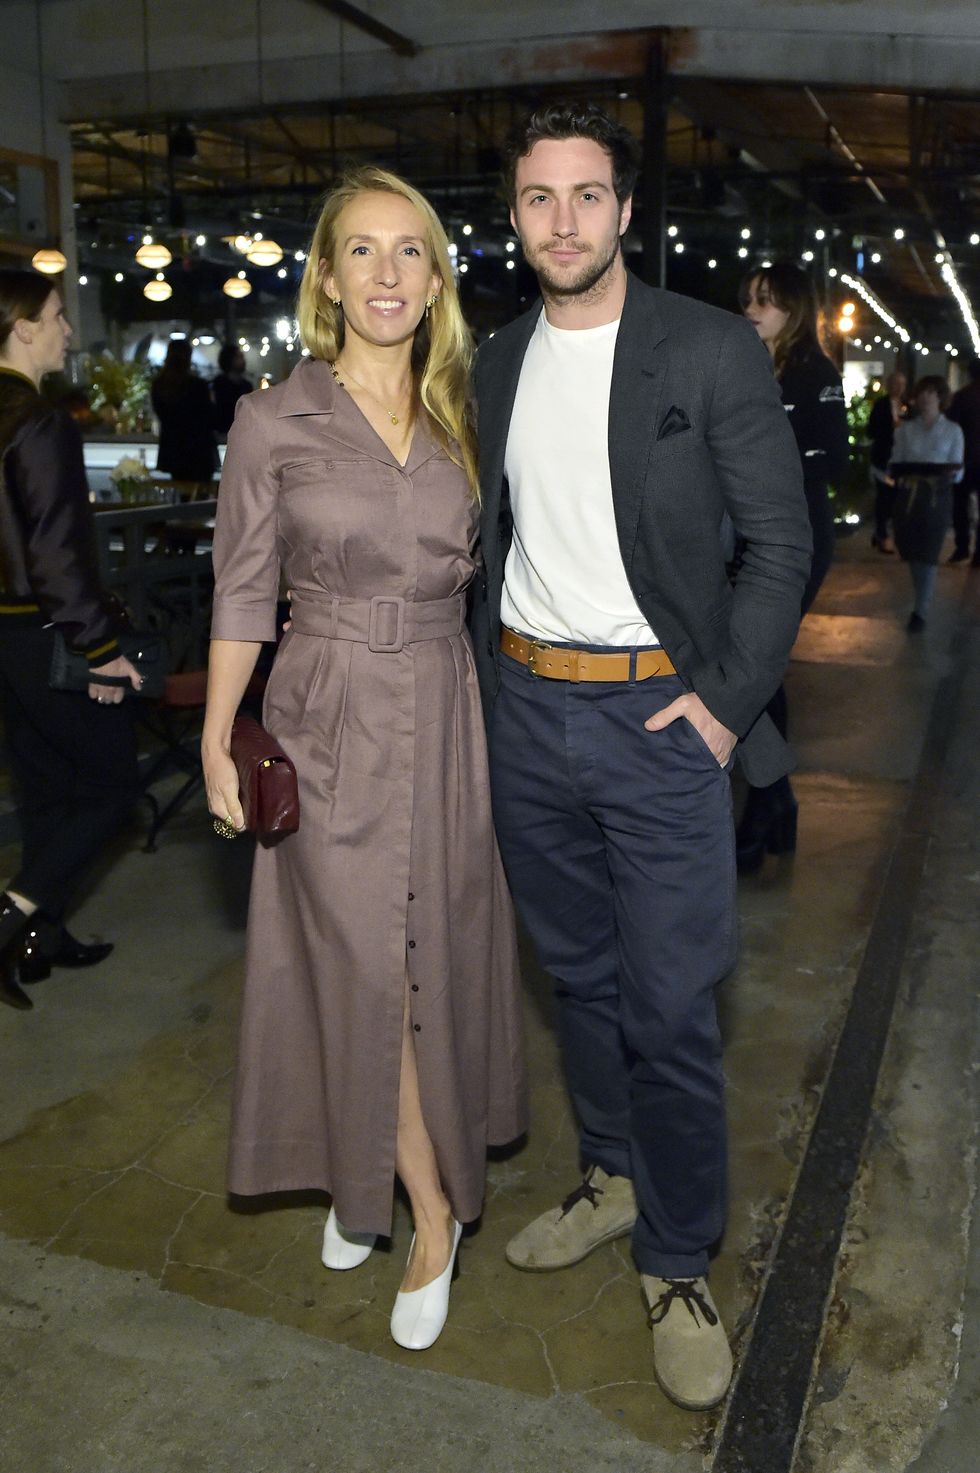 los angeles, california   february 12  sam taylor johnson and aaron taylor johnson attends hauser  wirth x matchesfashion at hauser  wirth on february 12, 2020 in los angeles, california photo by stefanie keenangetty images for hauser  wirth x matchesfashion